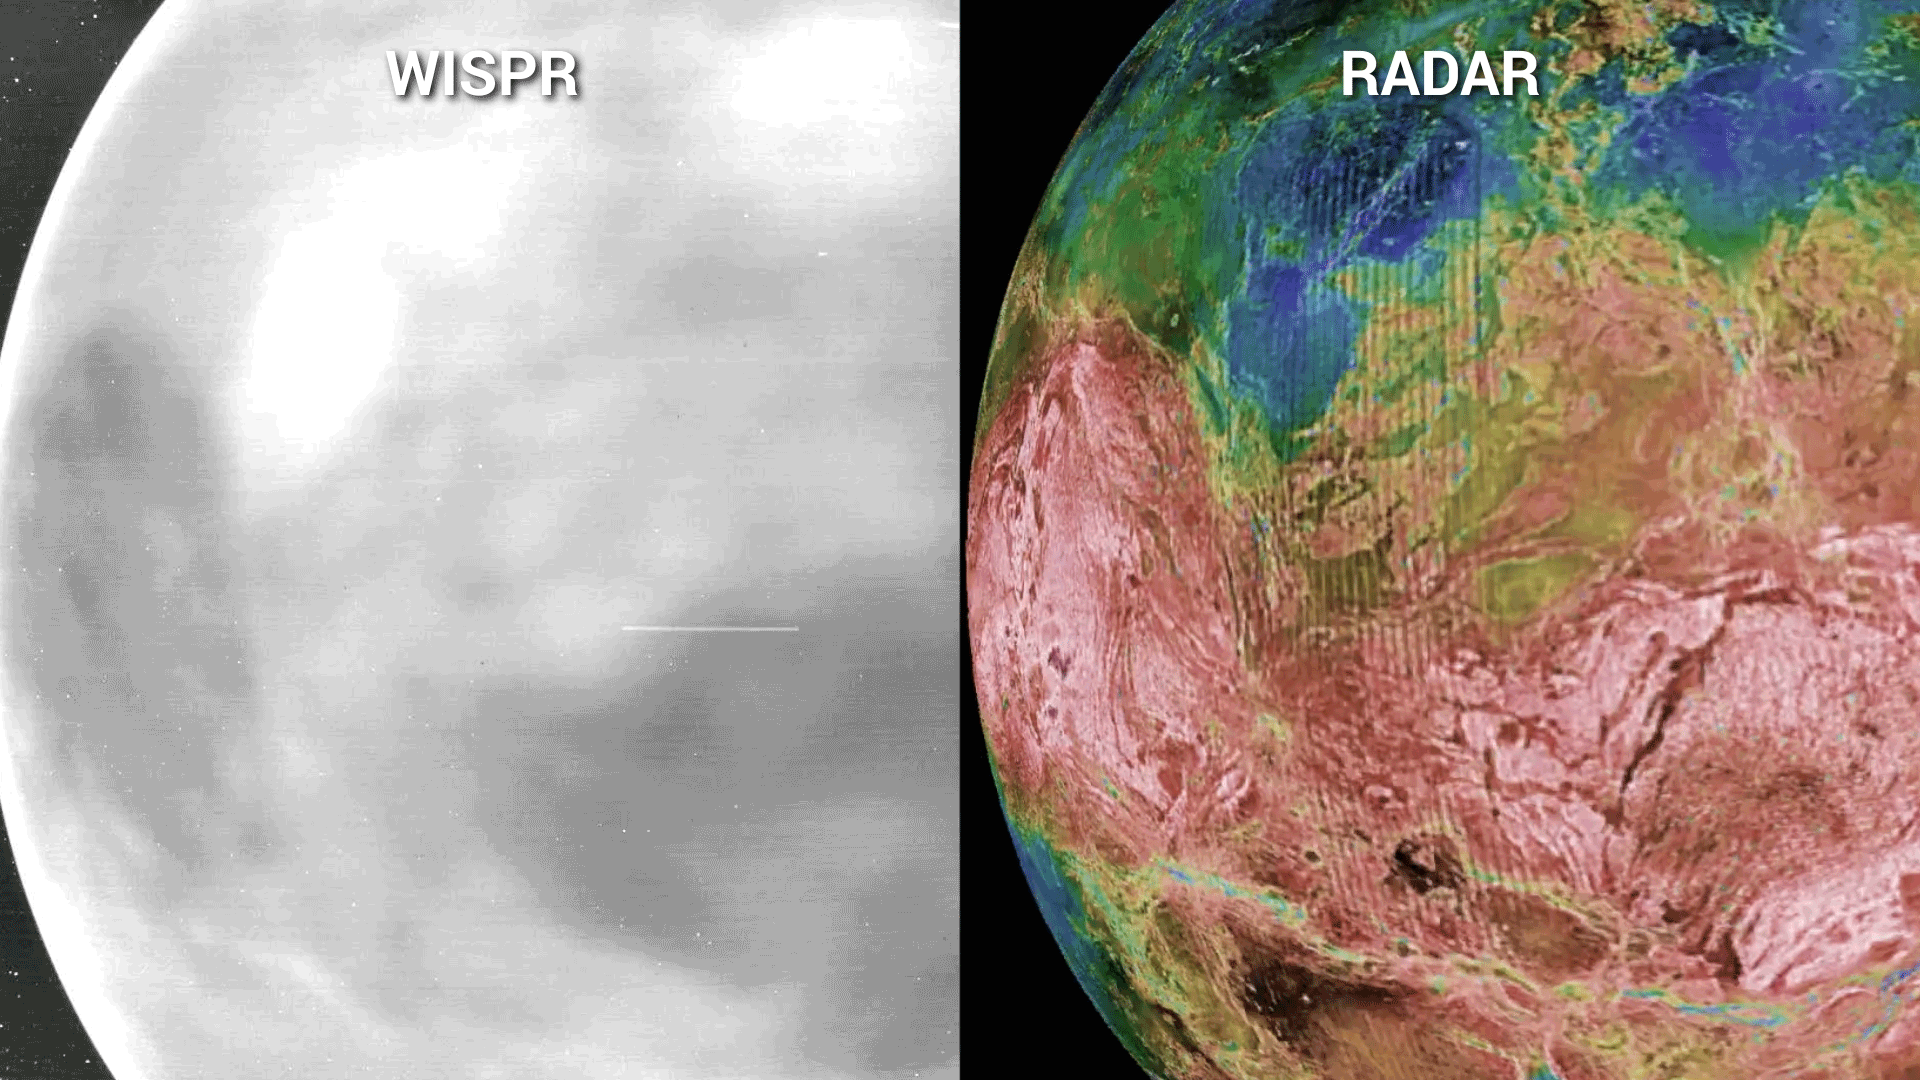 Two scanning videos side by side of Venus' surface in visible light and radar